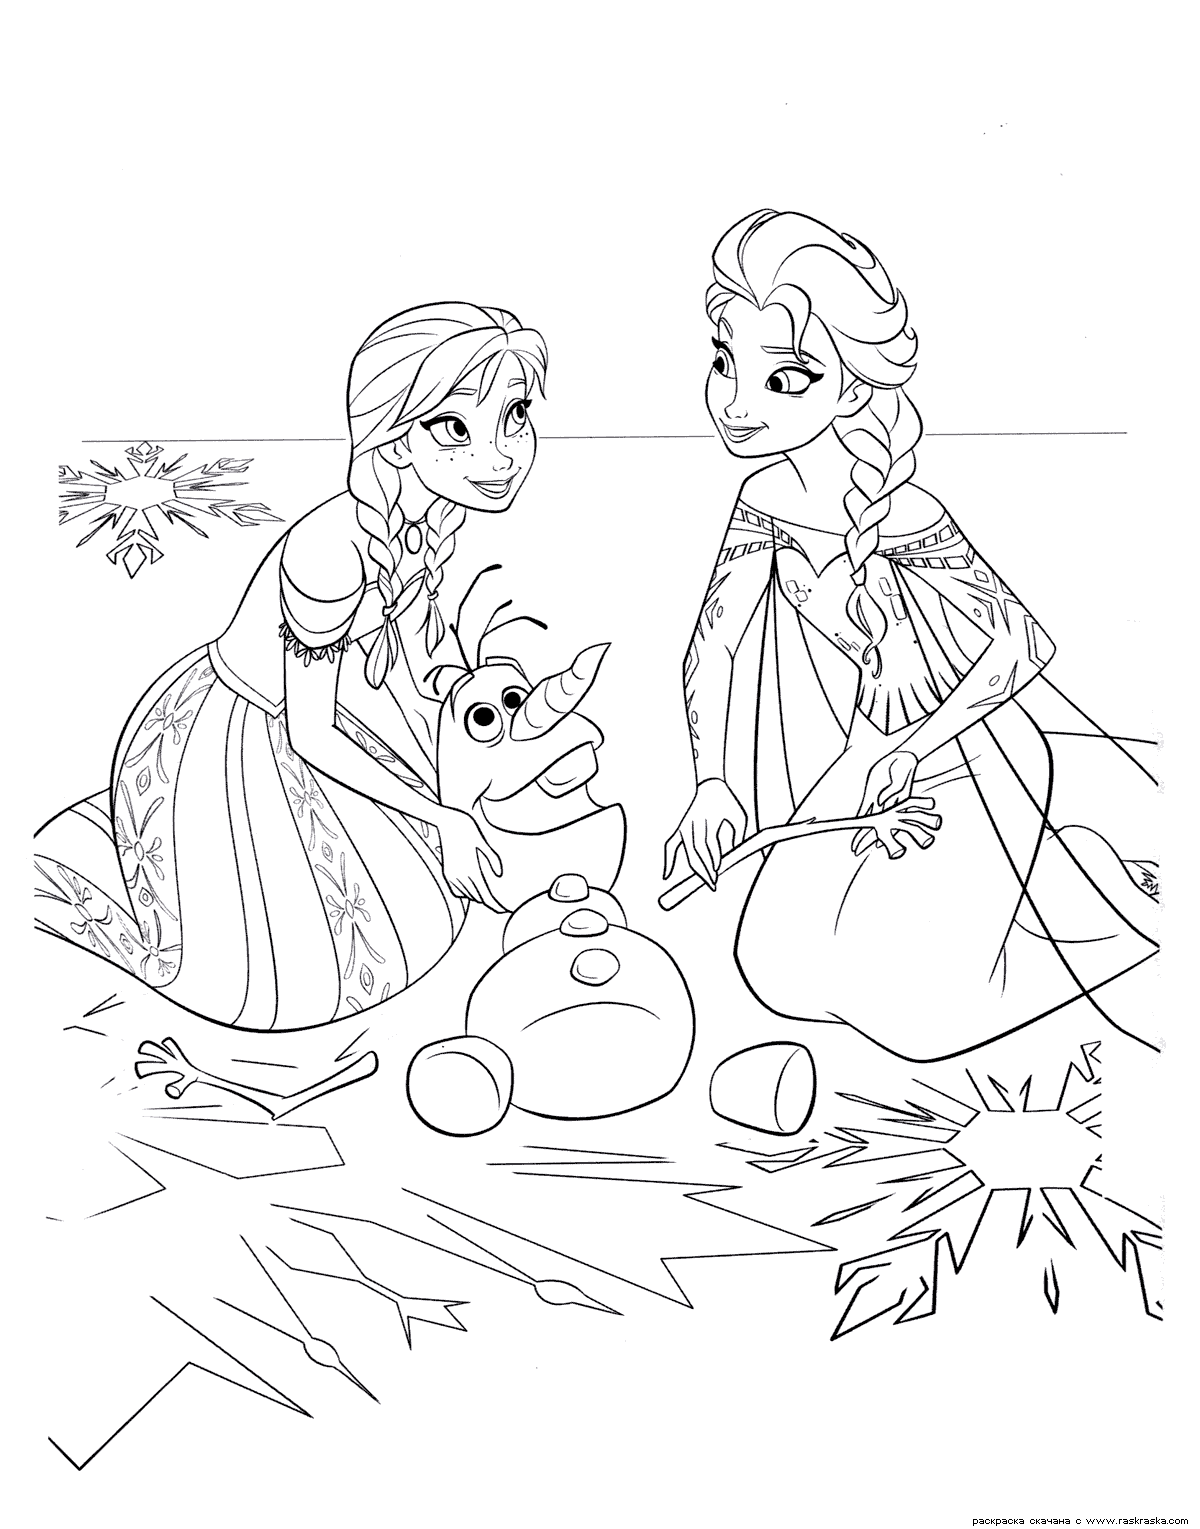 Frozen coloring pages, animated film characters Elsa ...